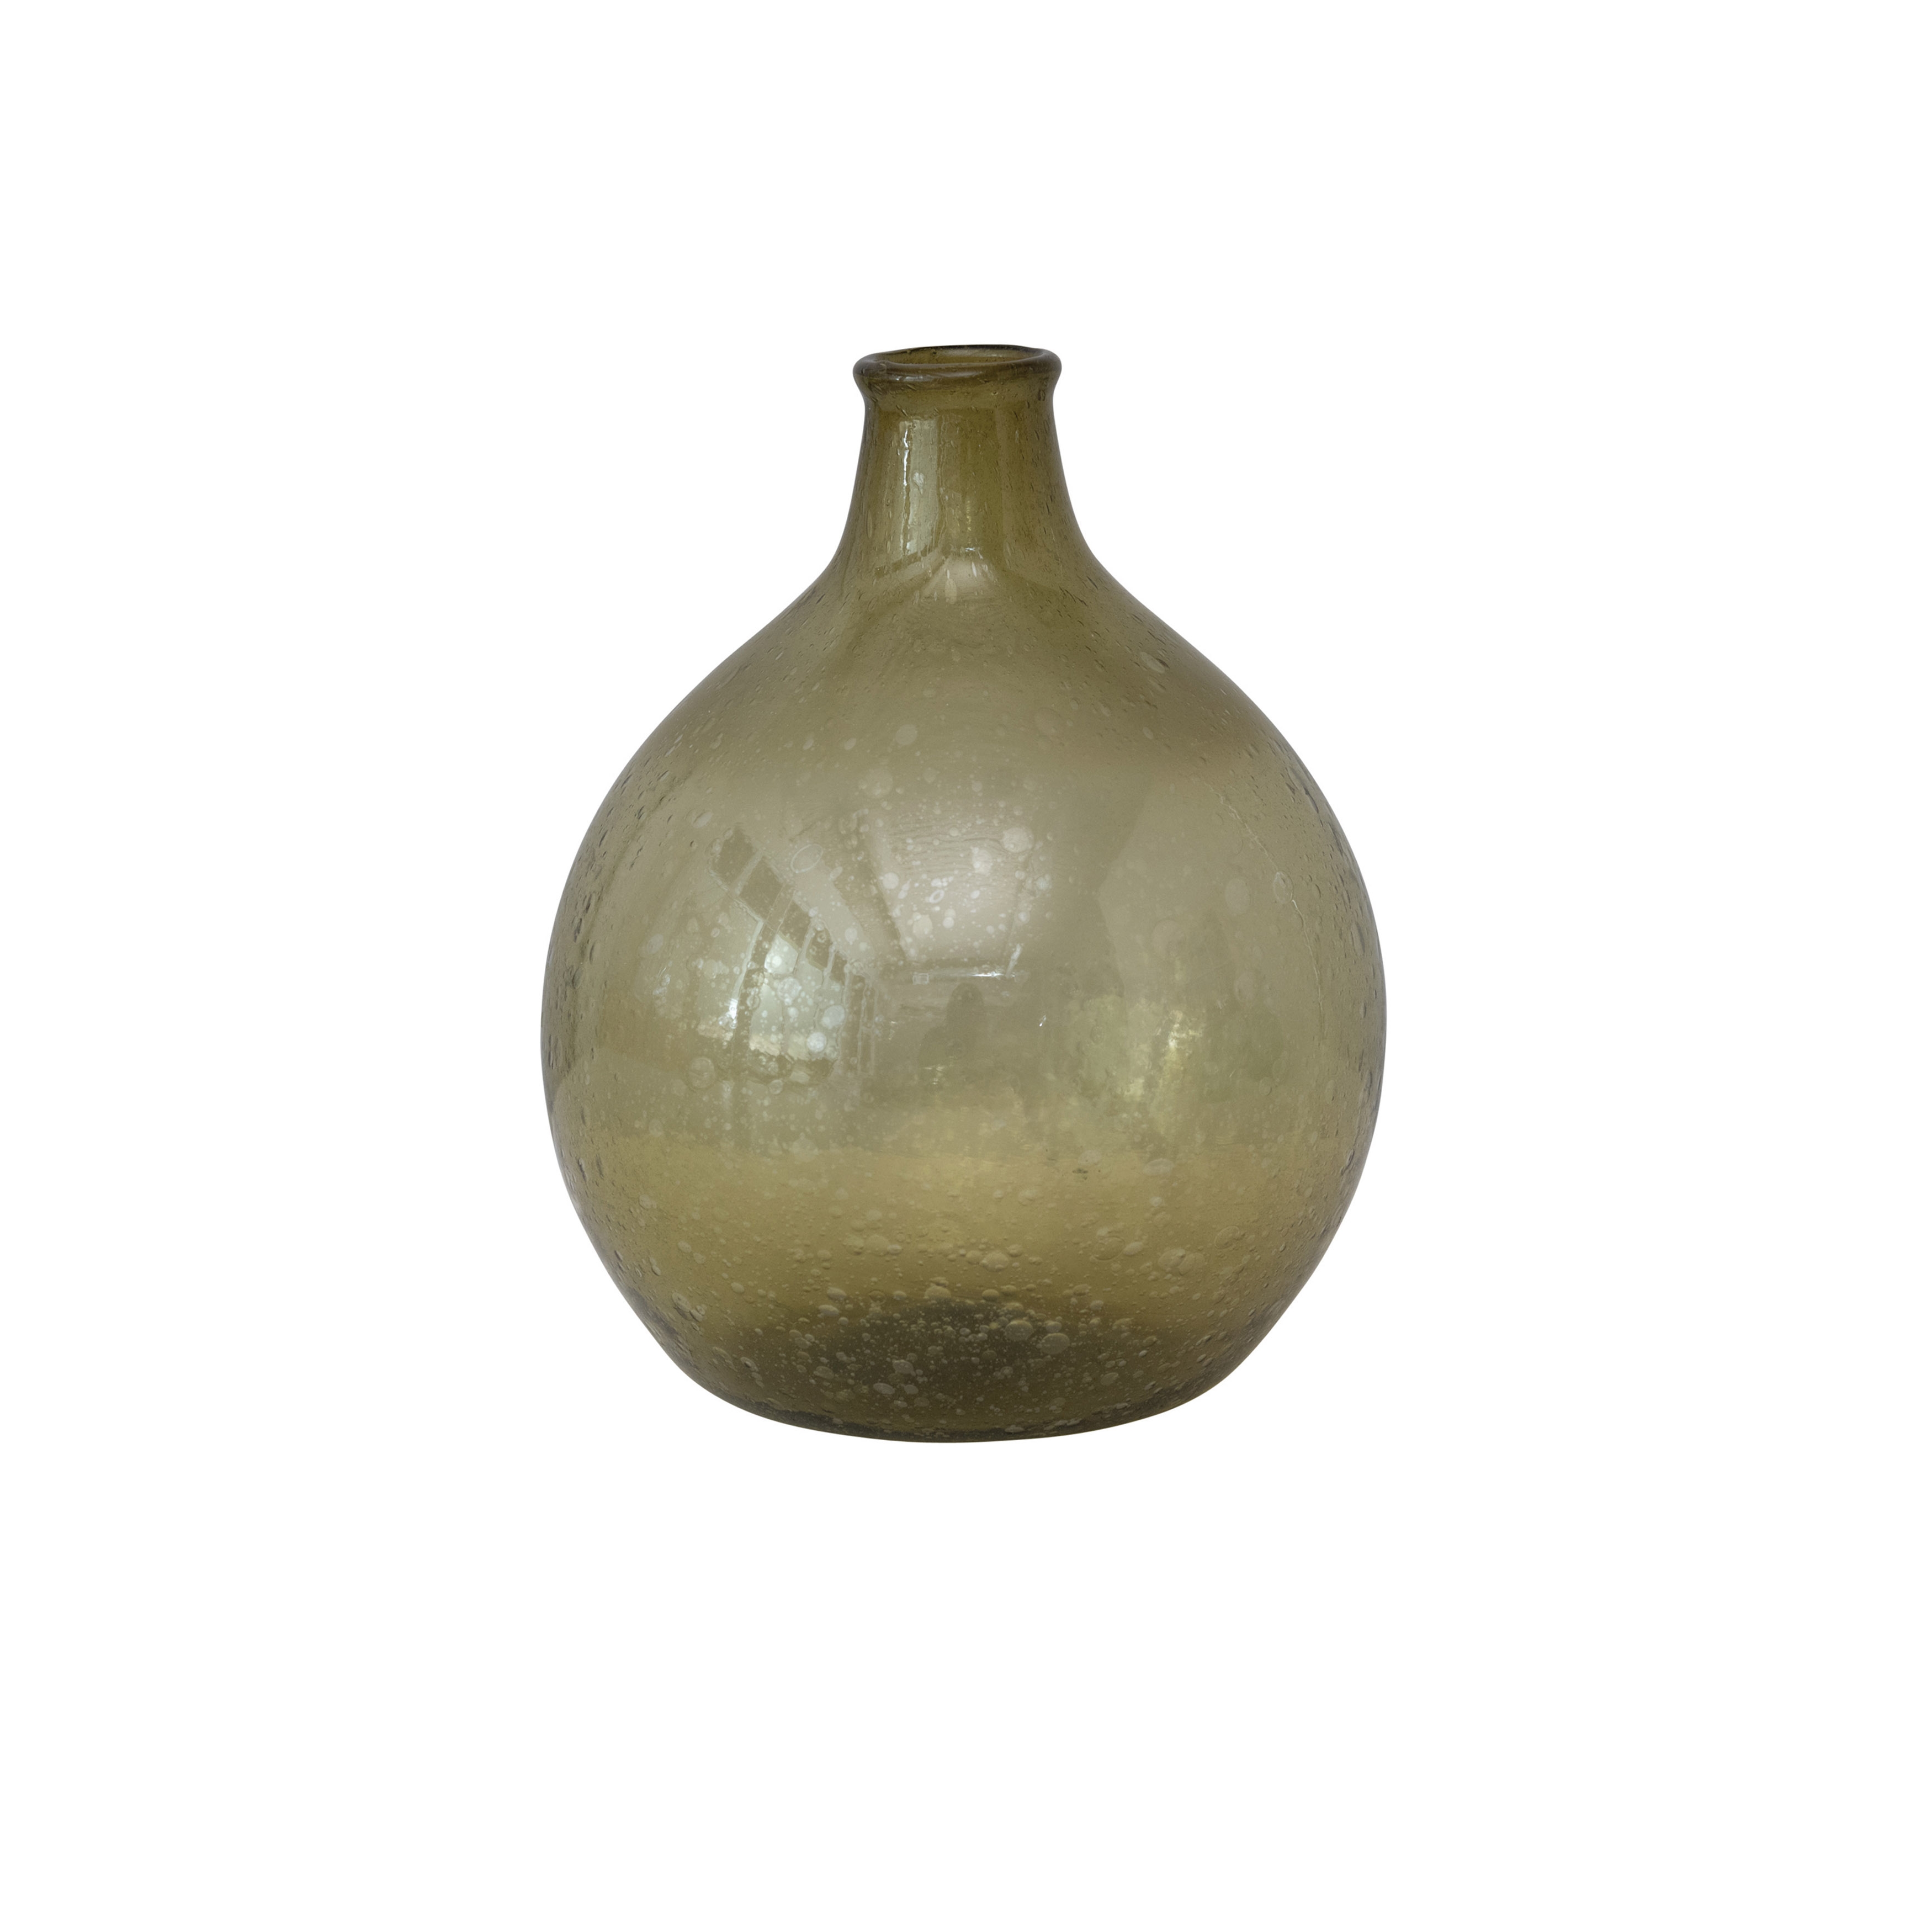  Hand Blown Glass Vase, Olive Green - Image 1